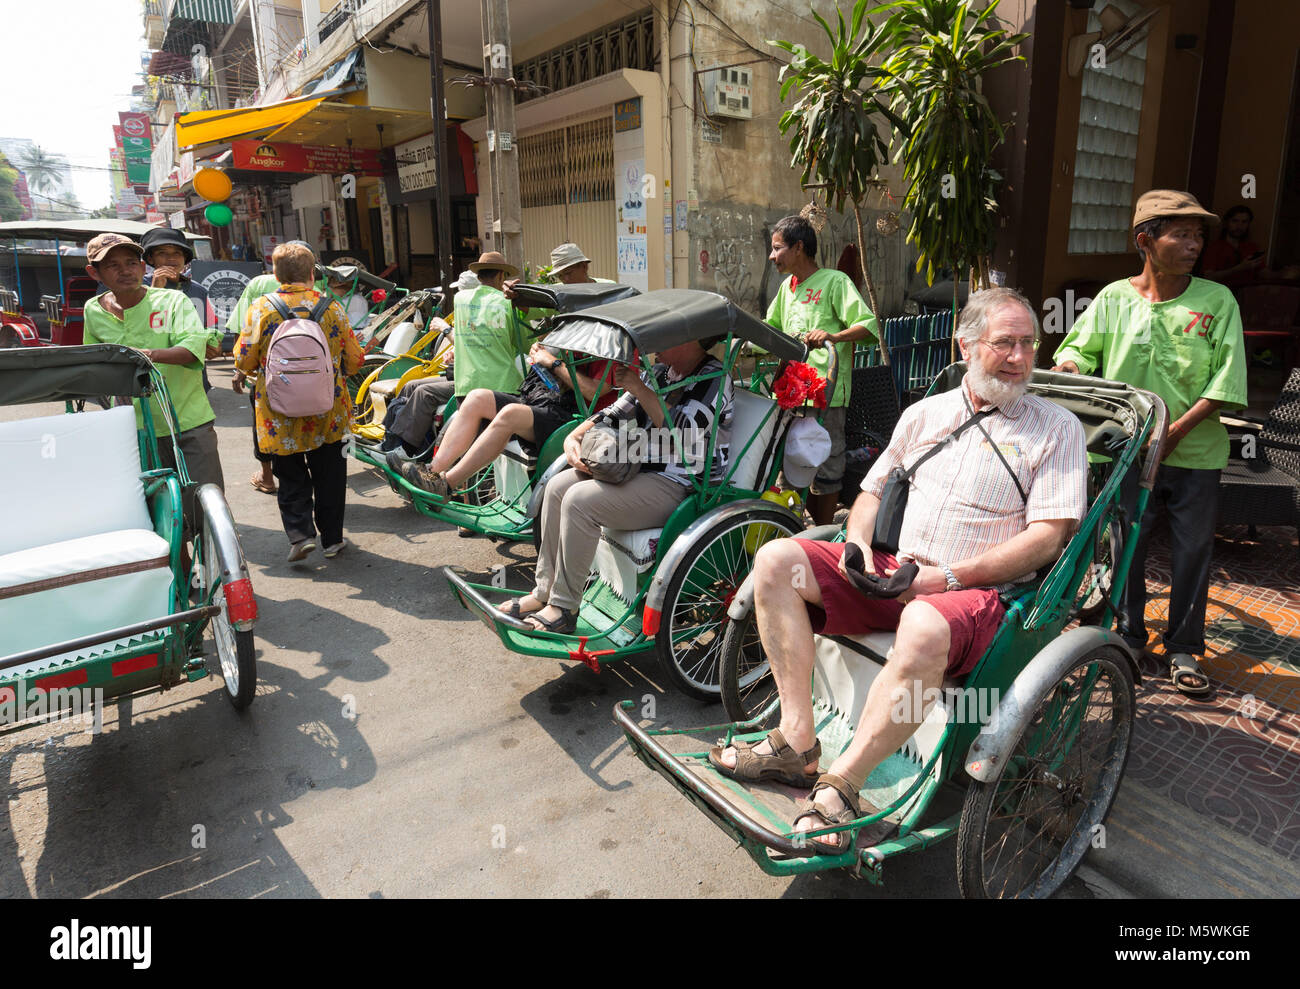 Mature tourist sitting in a cyclo, a form of bicycle taxi, Phnom Penh, Cambodia Asia Stock Photo